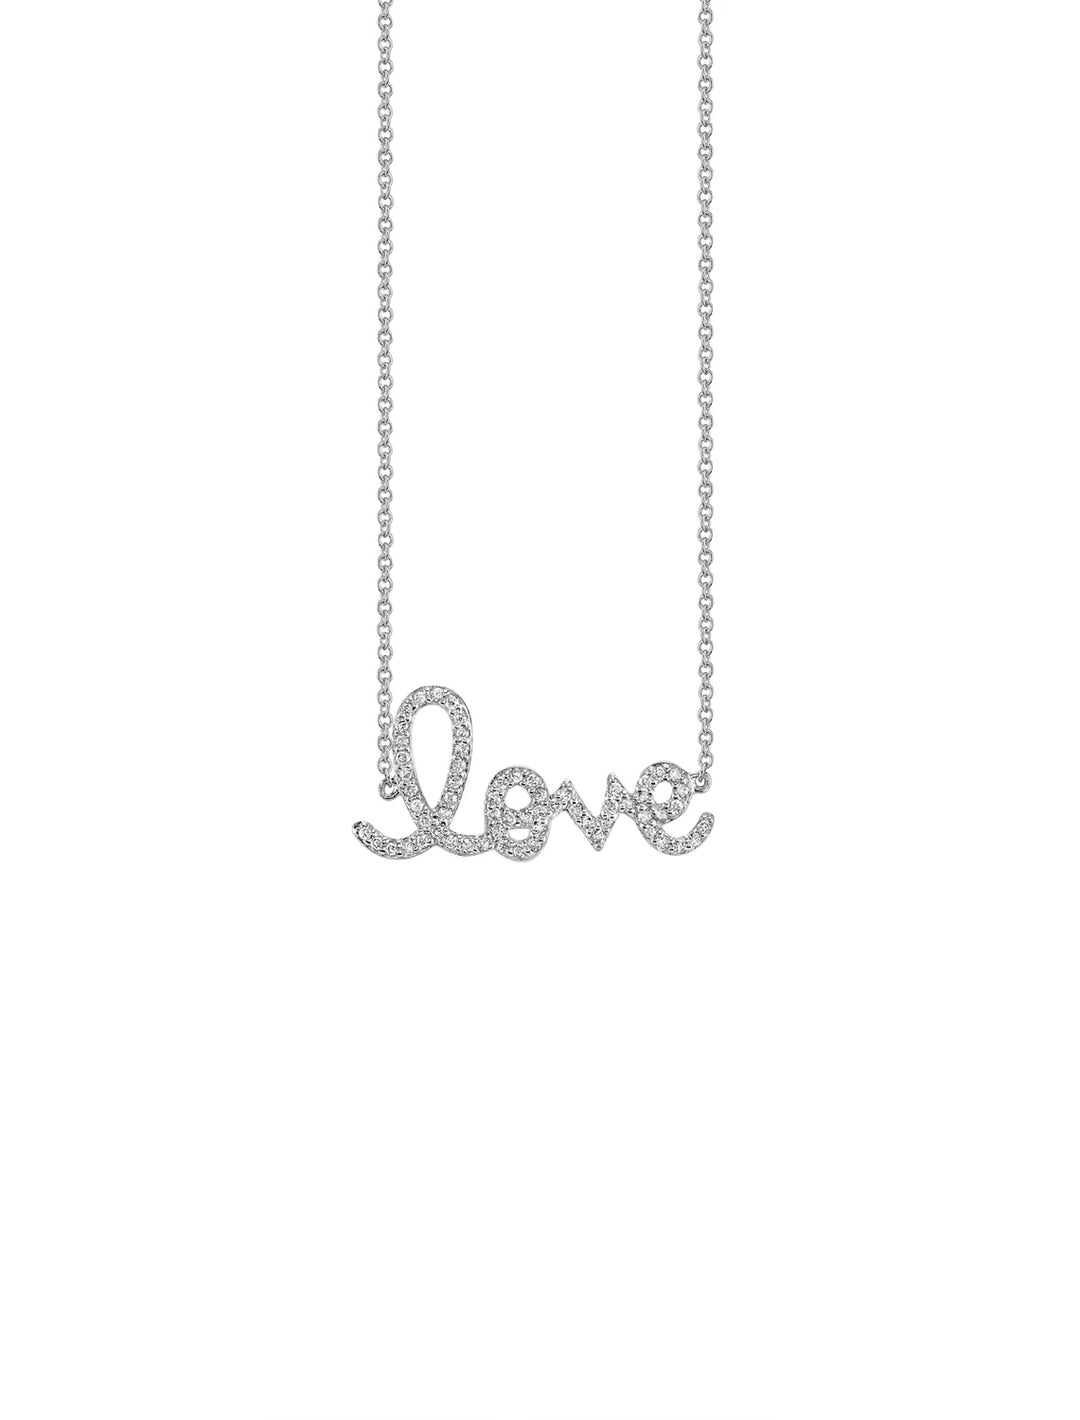 Front view of Sydney Evan's medium love script charm necklace in white gold.